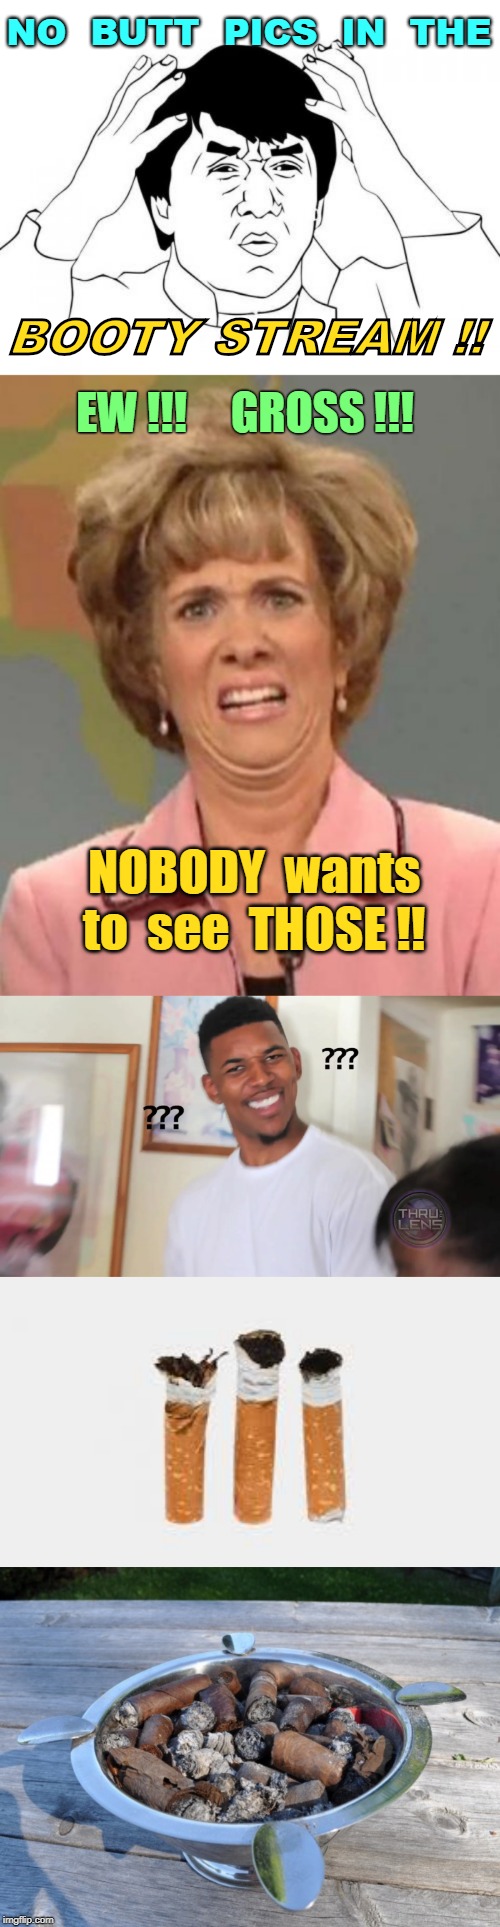 NO BUTT PICS IN THE BOOTY STREAM !! | NO  BUTT  PICS  IN  THE; BOOTY STREAM !! EW !!!     GROSS !!! NOBODY  wants  to  see  THOSE !! | image tagged in jackie chan wtf,disgusted kristin wiig,black guy question mark,rick75230,booty,funny memes | made w/ Imgflip meme maker